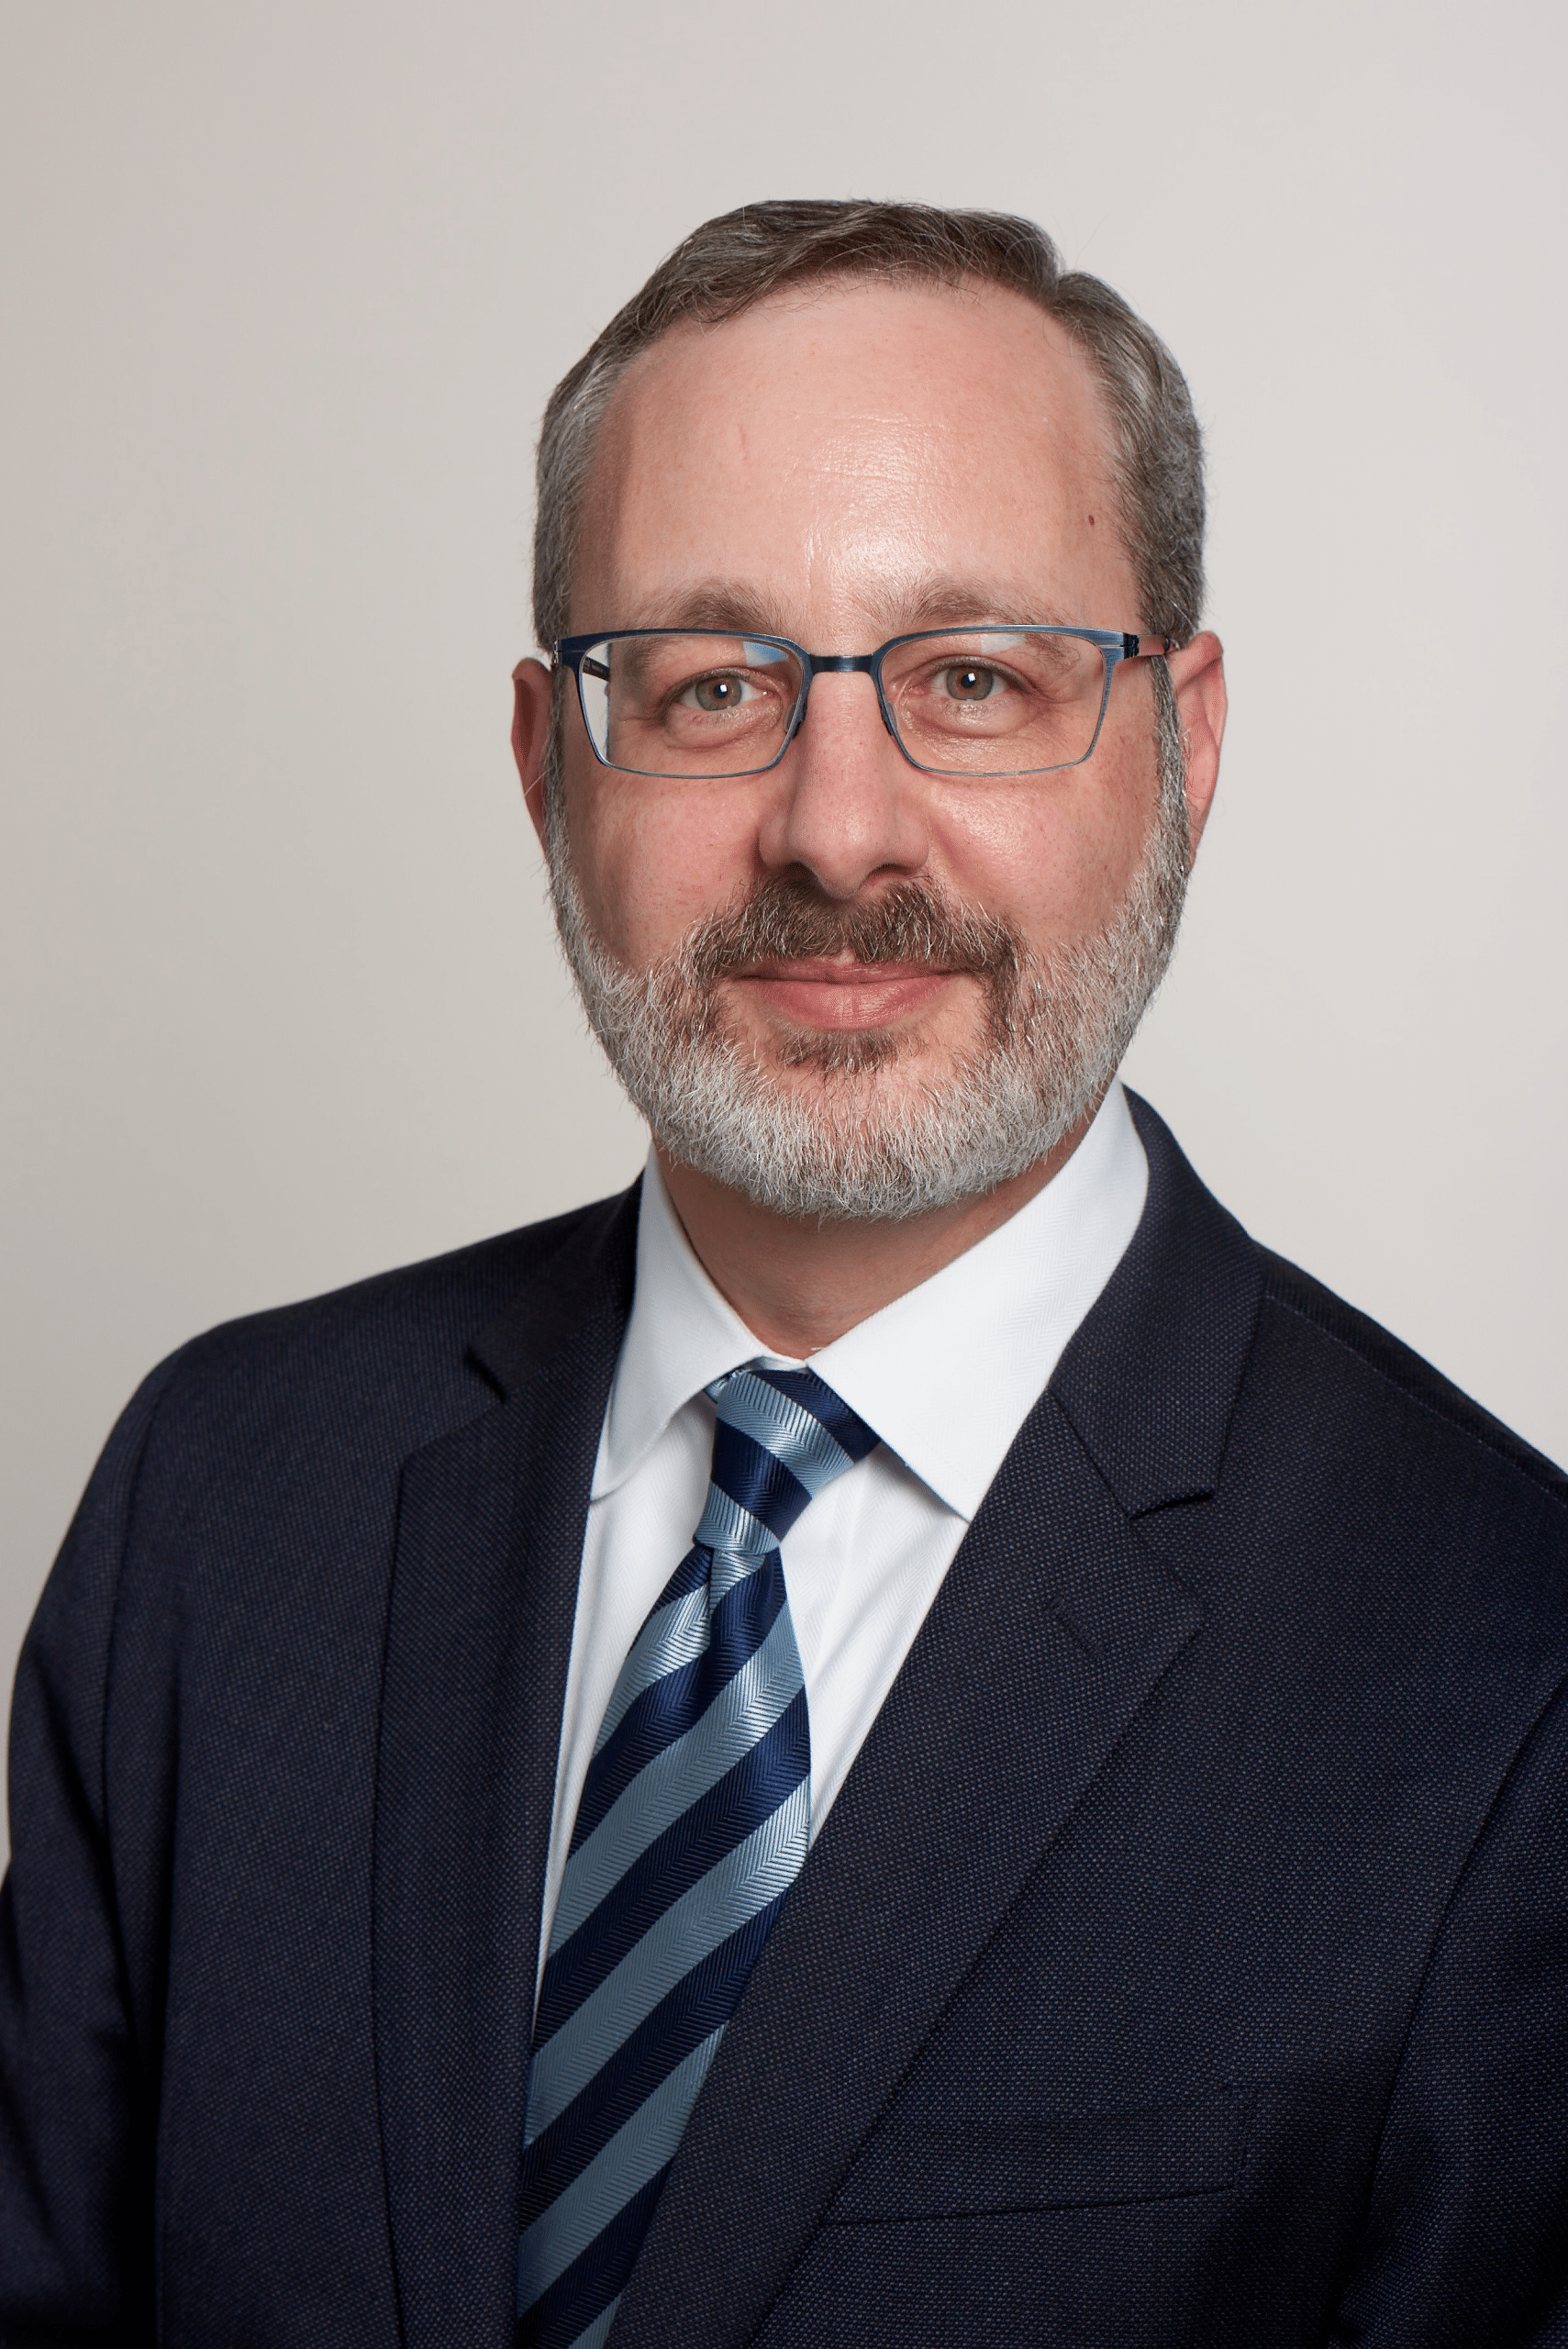 Bruce E. Sands, MD, MS